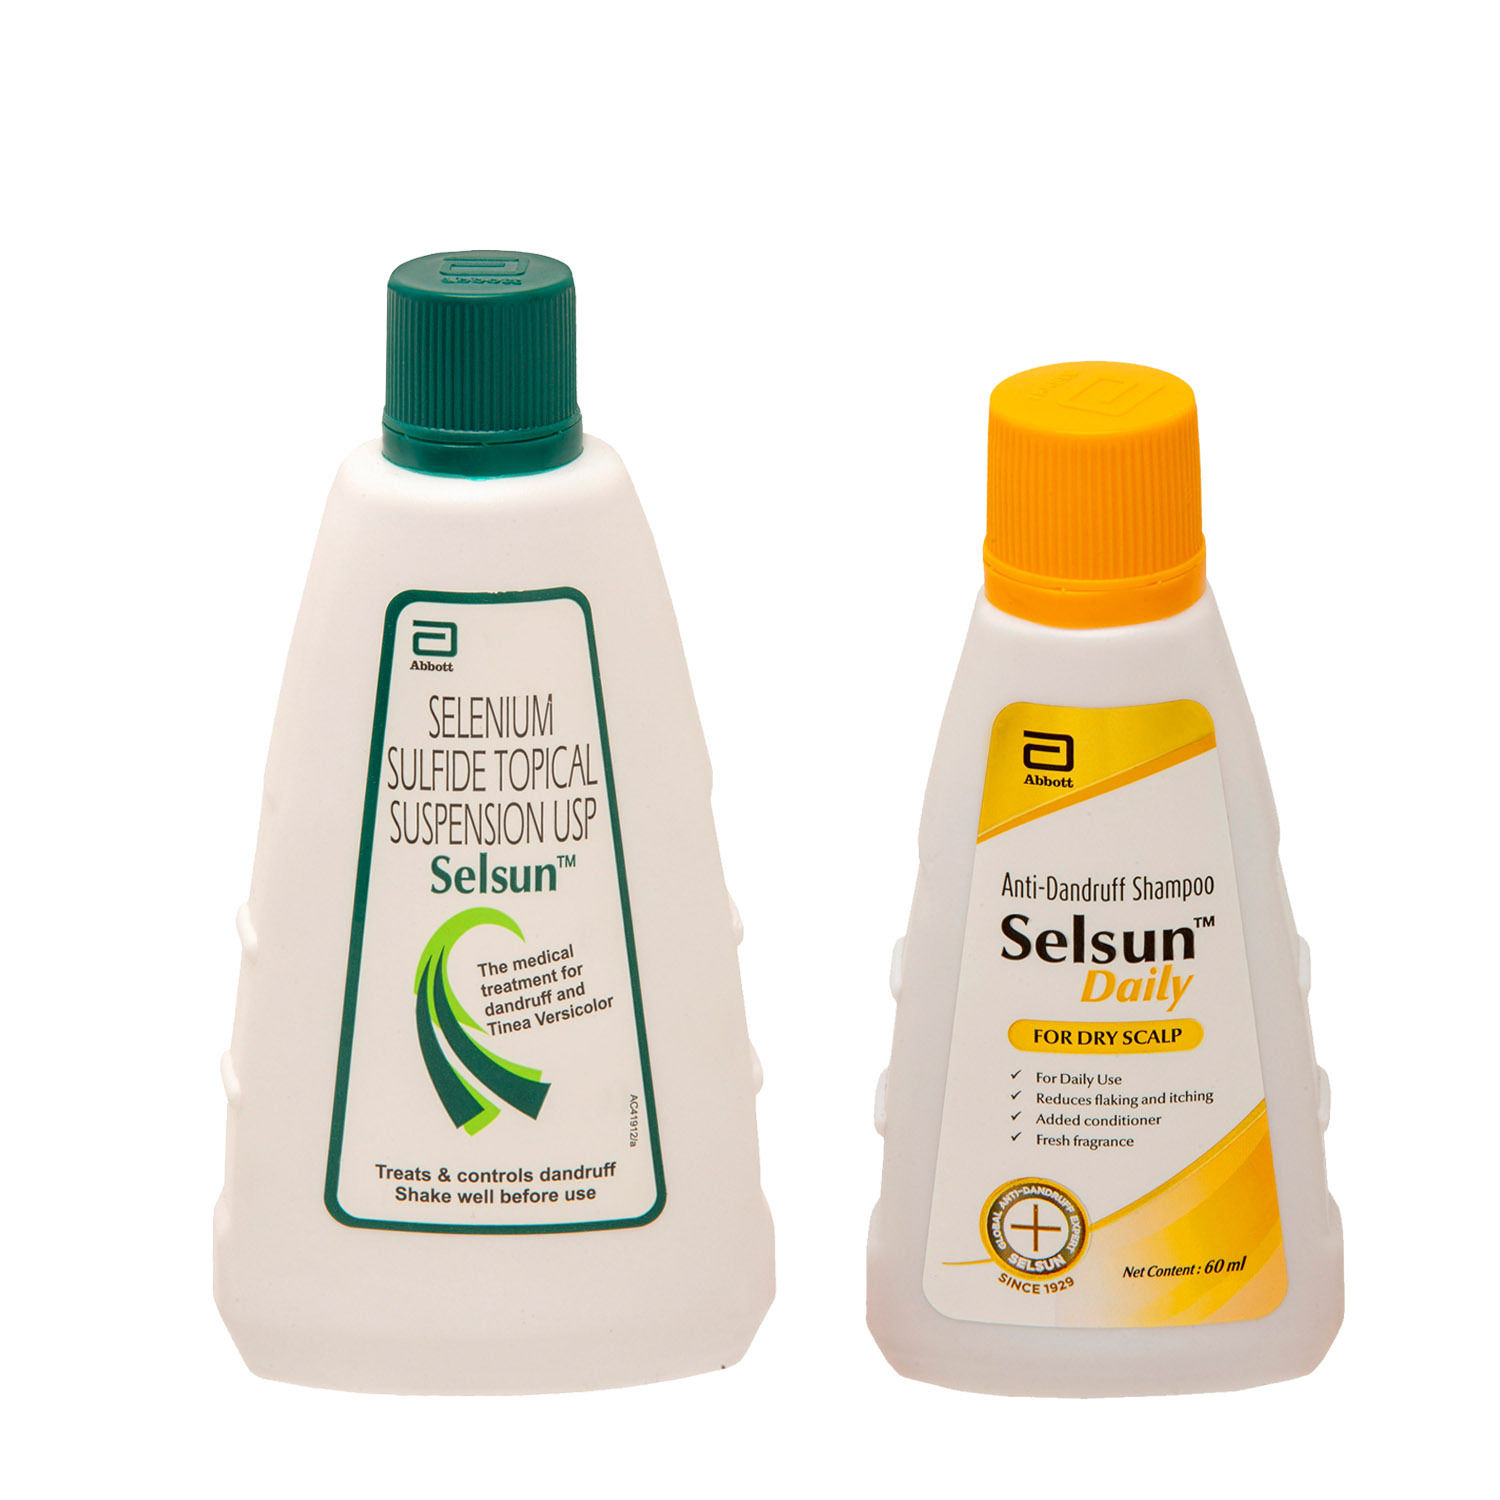 Selsun Suspension & Selsun Daily Combo Pack For Dandruff Treatment And Regular Control